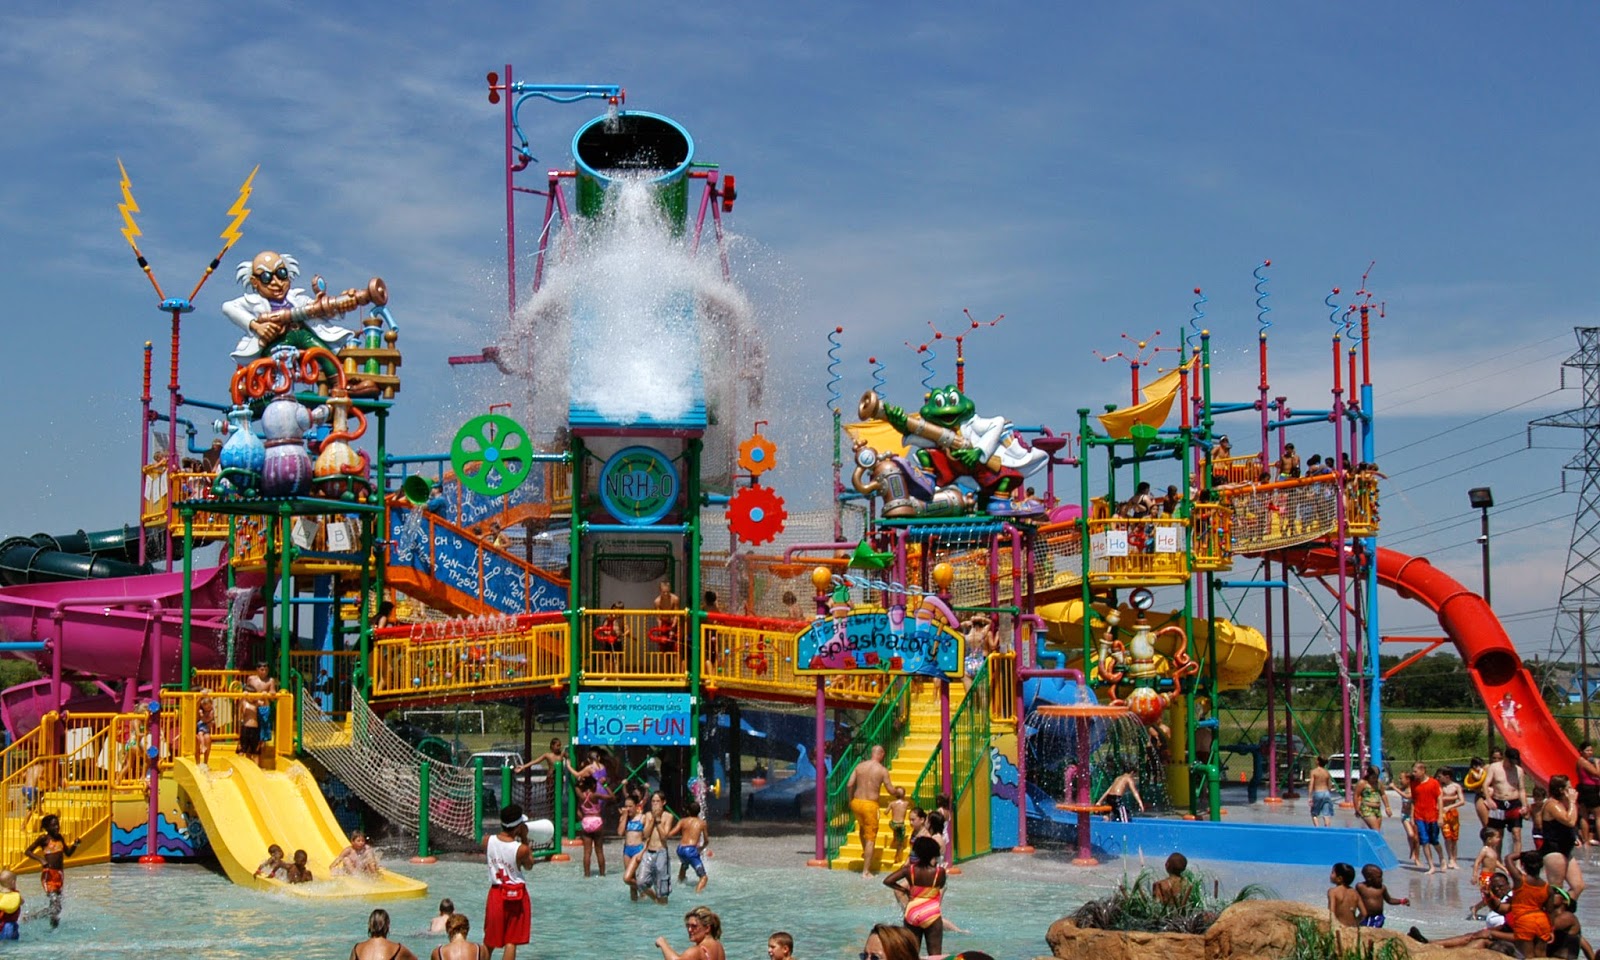 NRH2O Family Water Park - WhiteWater